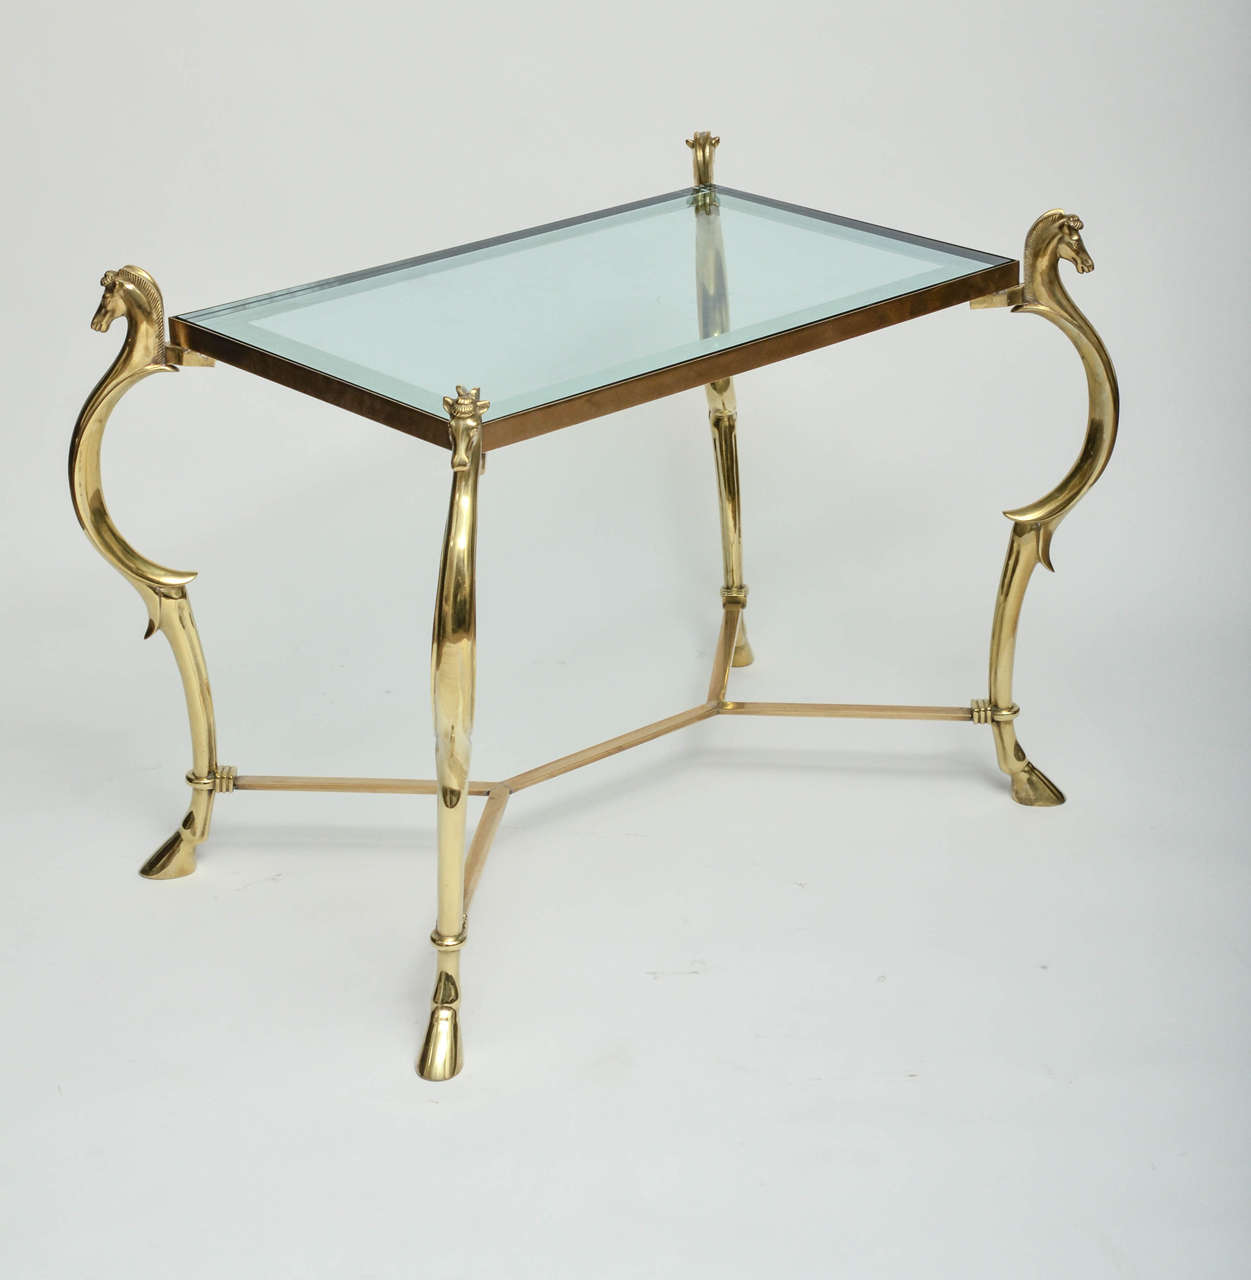 Pair of curvilinear brass side tables with horse head finials and mirror trim glass tops.